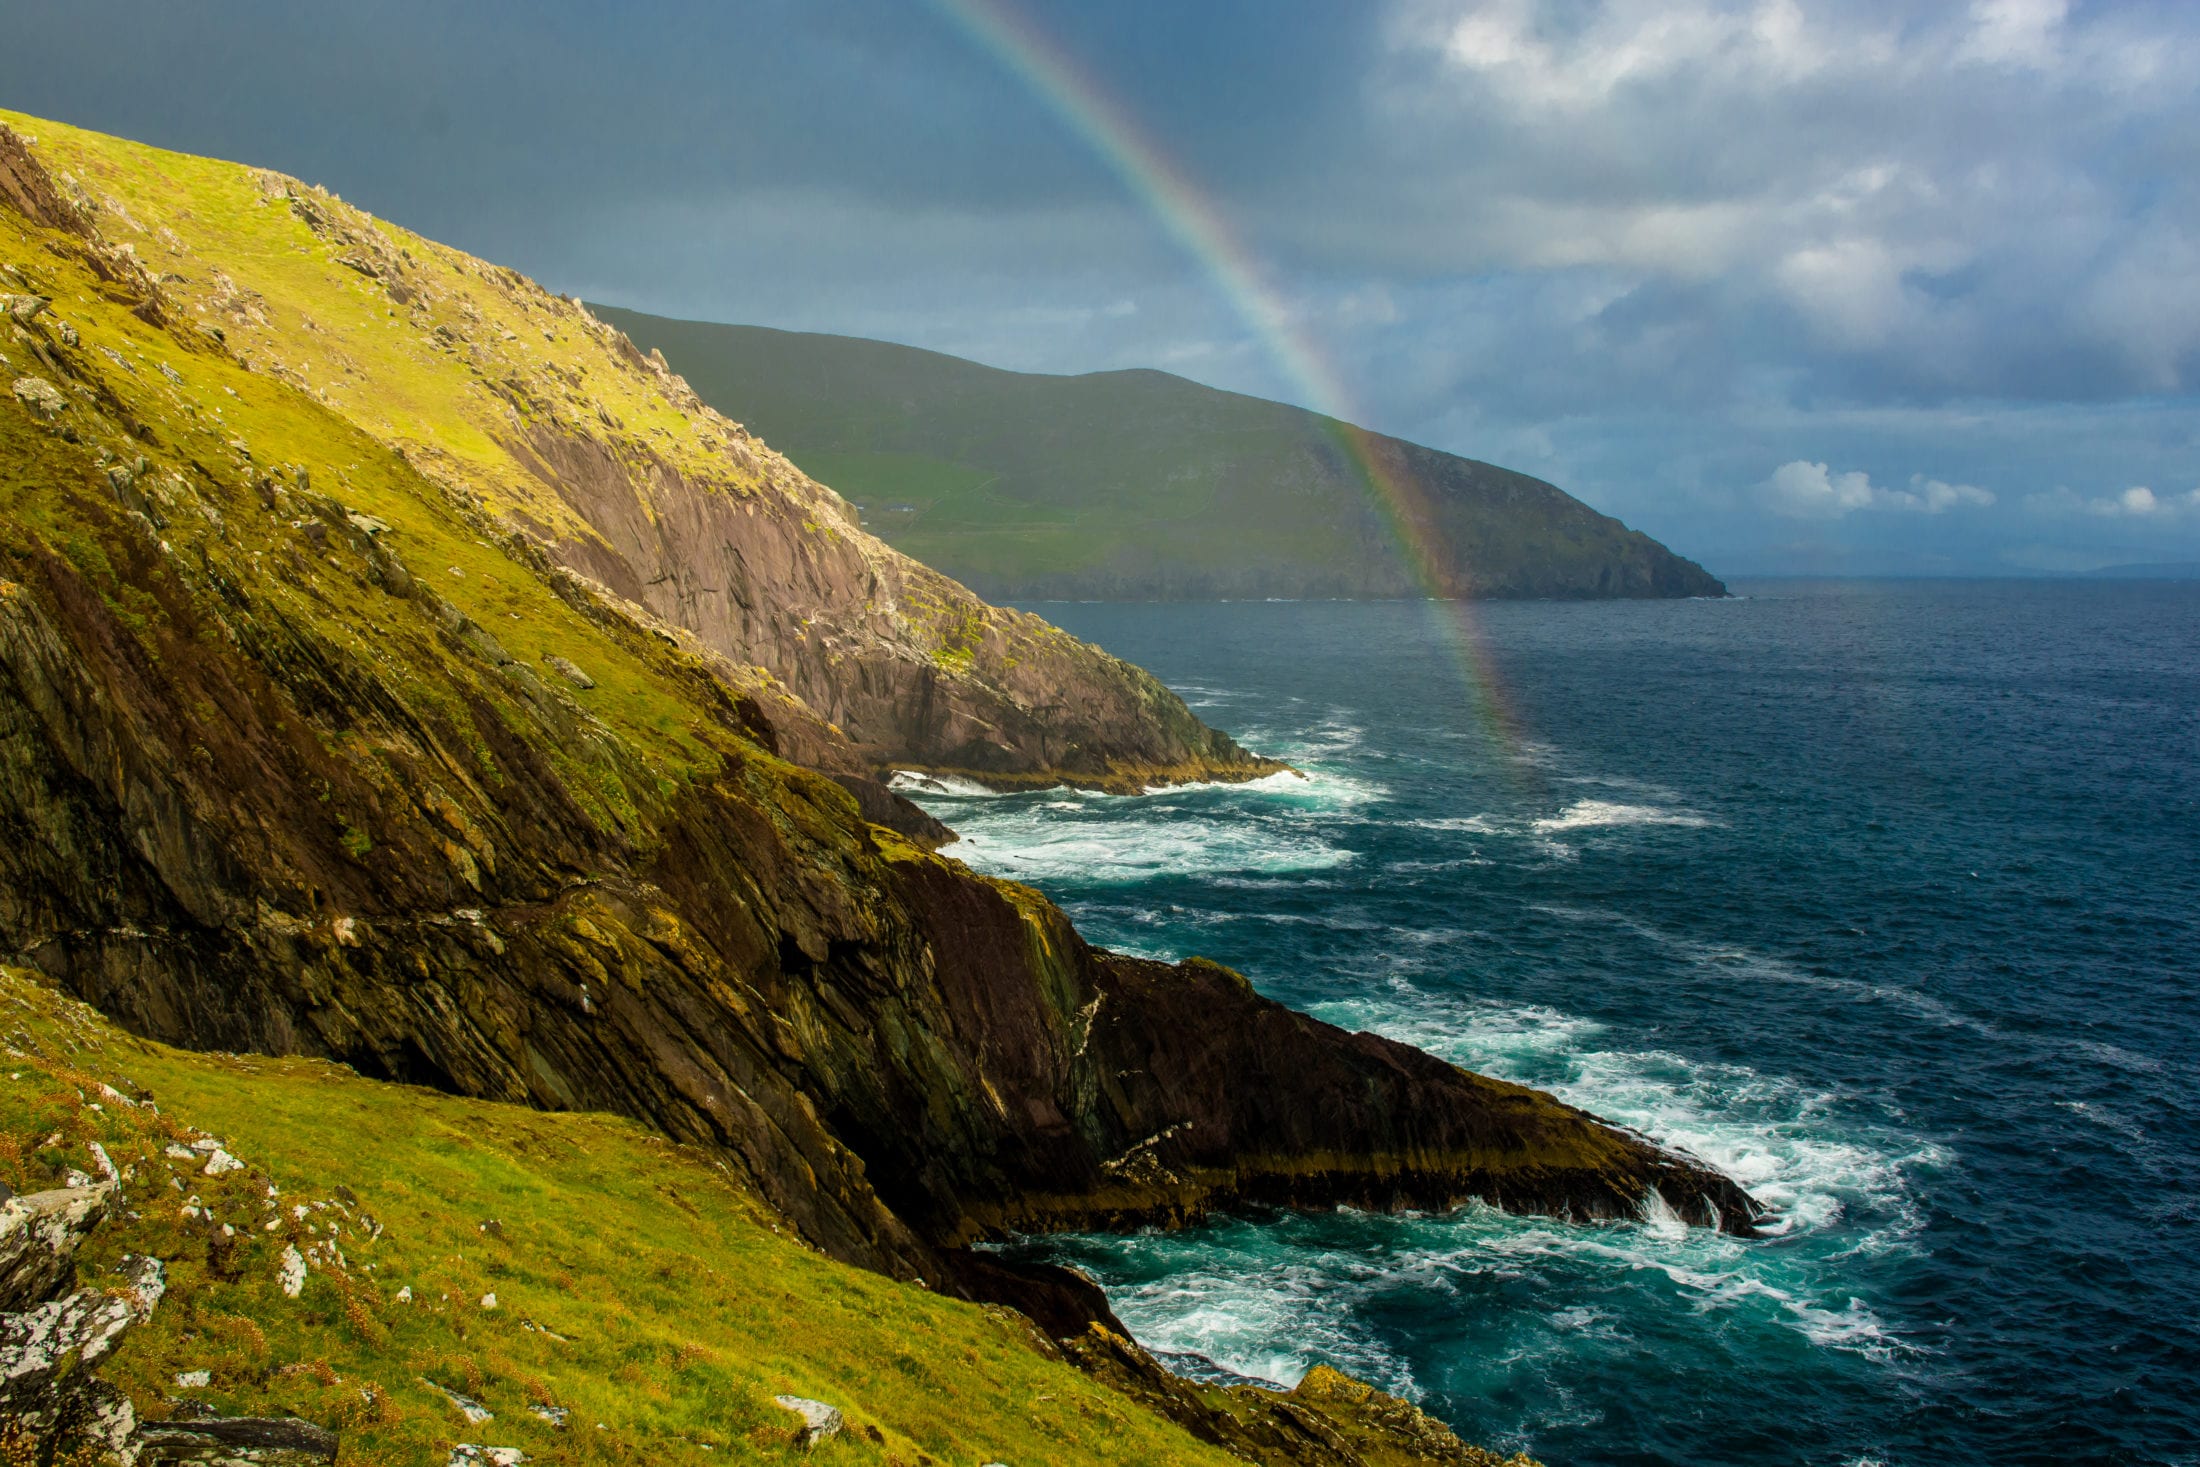 Visit the Emerald Isle: Join SUNY Broome for Irish Literature this Fall and see Ireland with new eyes